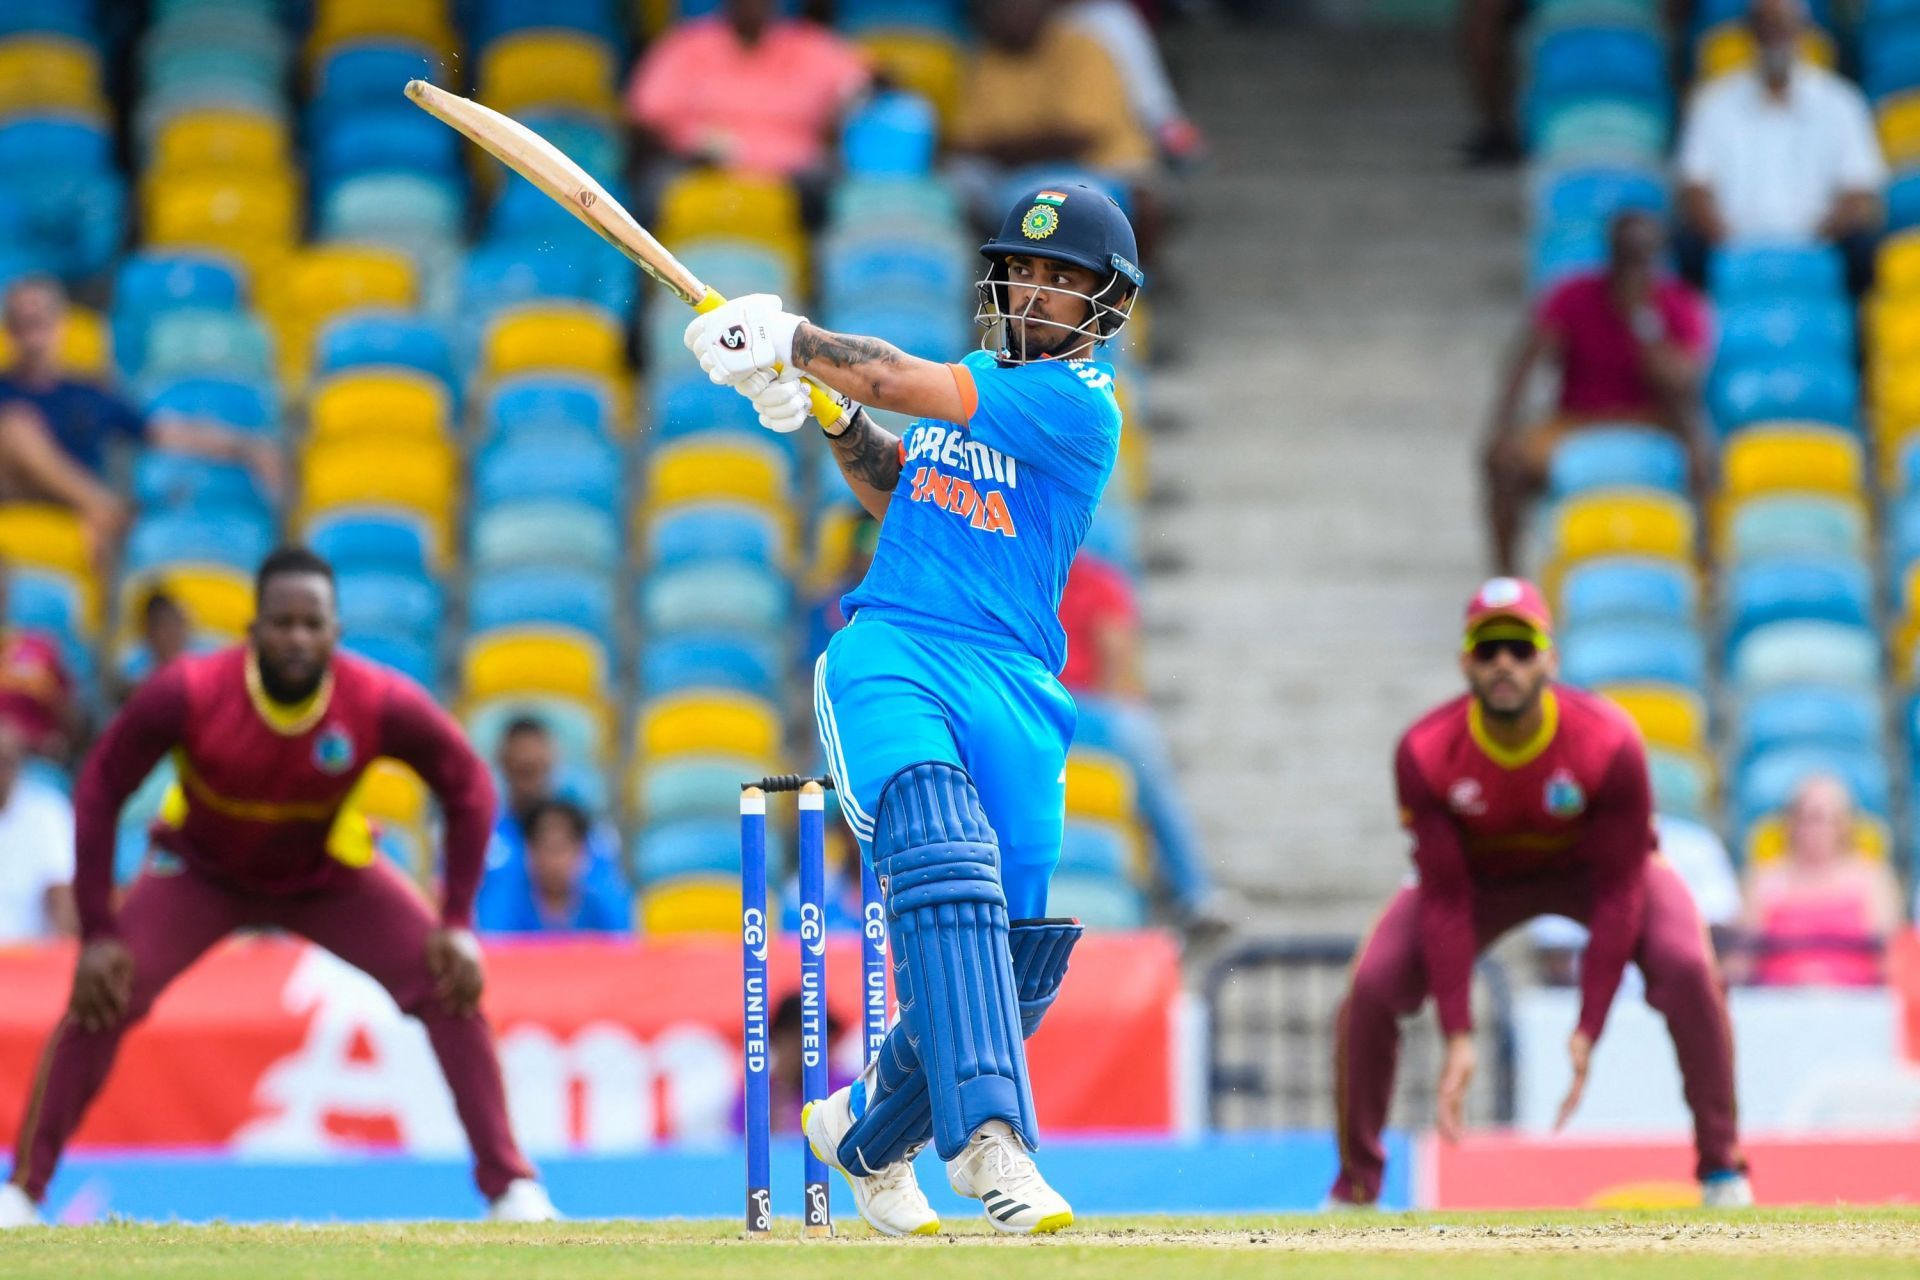 Ishan Kishan was in excellent form during the preceding ODI series